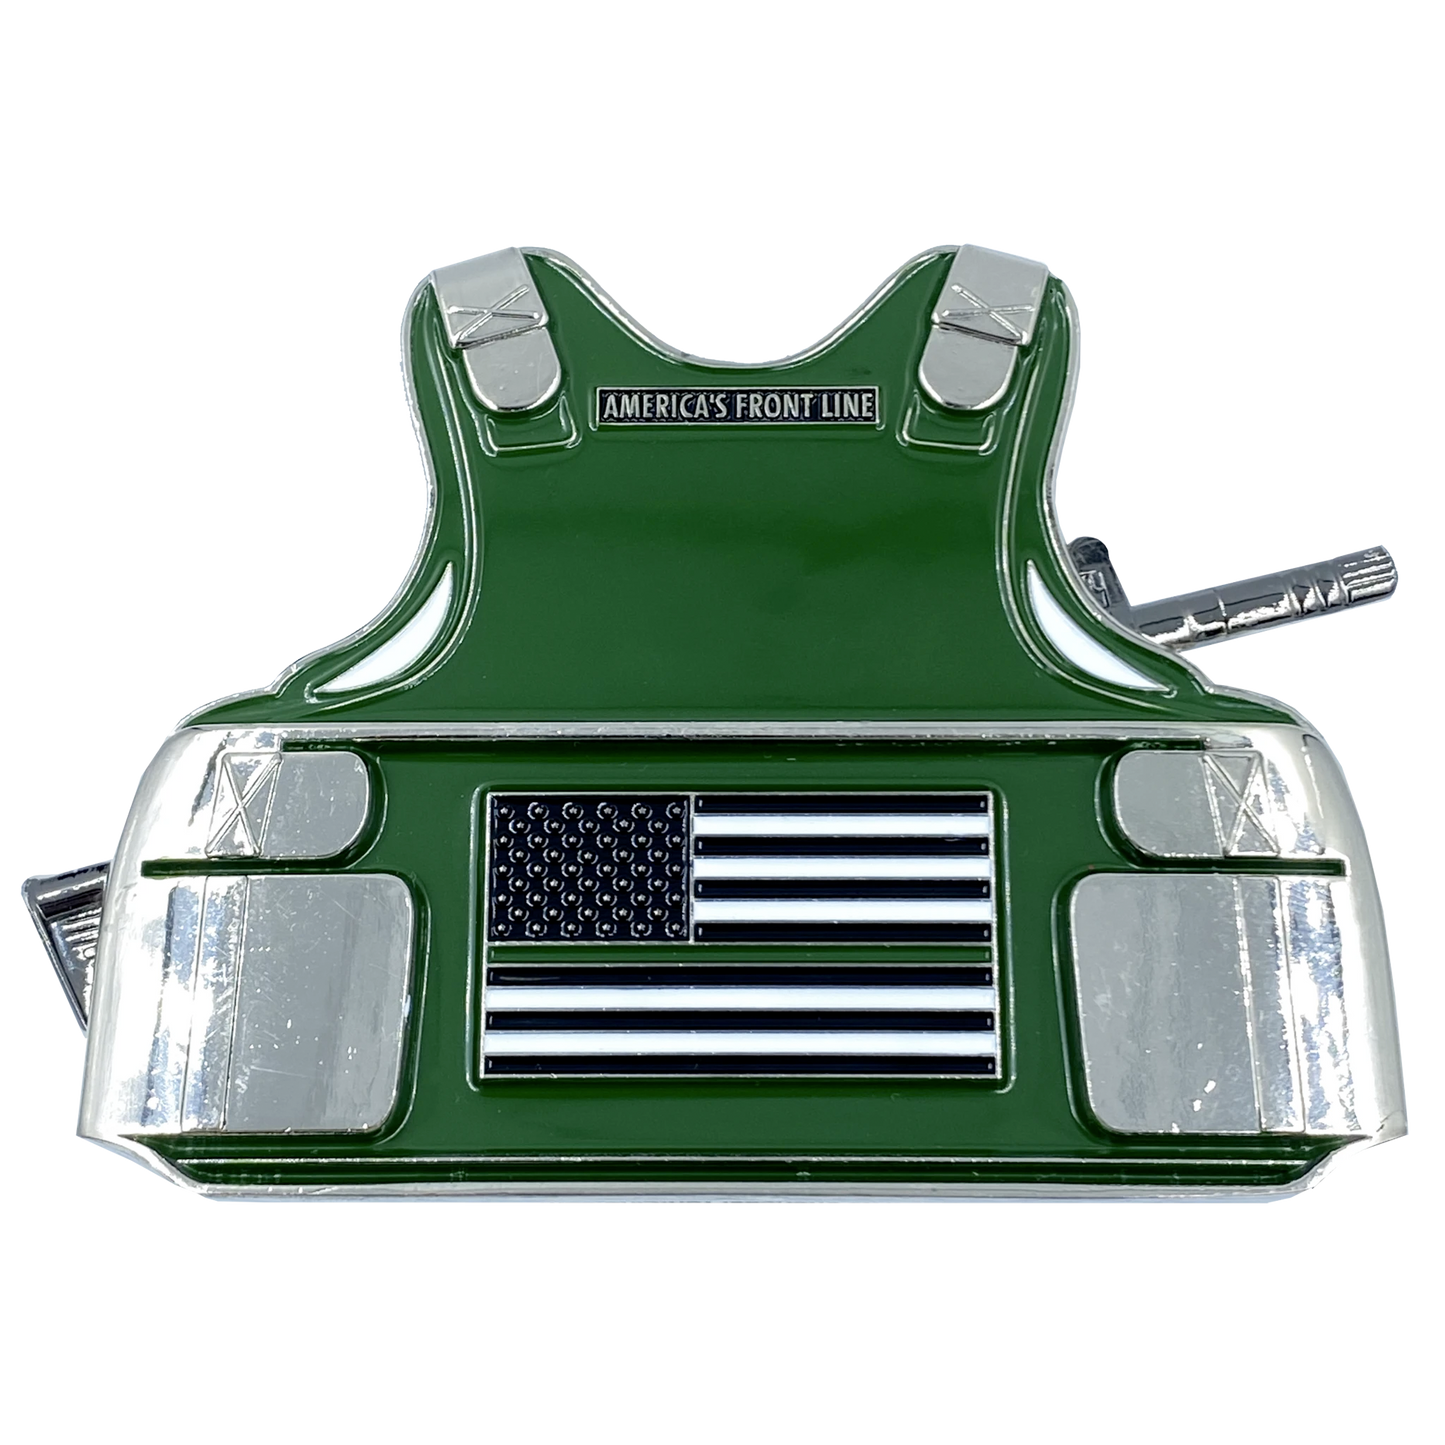 BL14-013 MILITARY POLICE MP MARINES M4 Body Armor 3D self standing Police Challenge Coin MARINE CORPS Thin Green Line